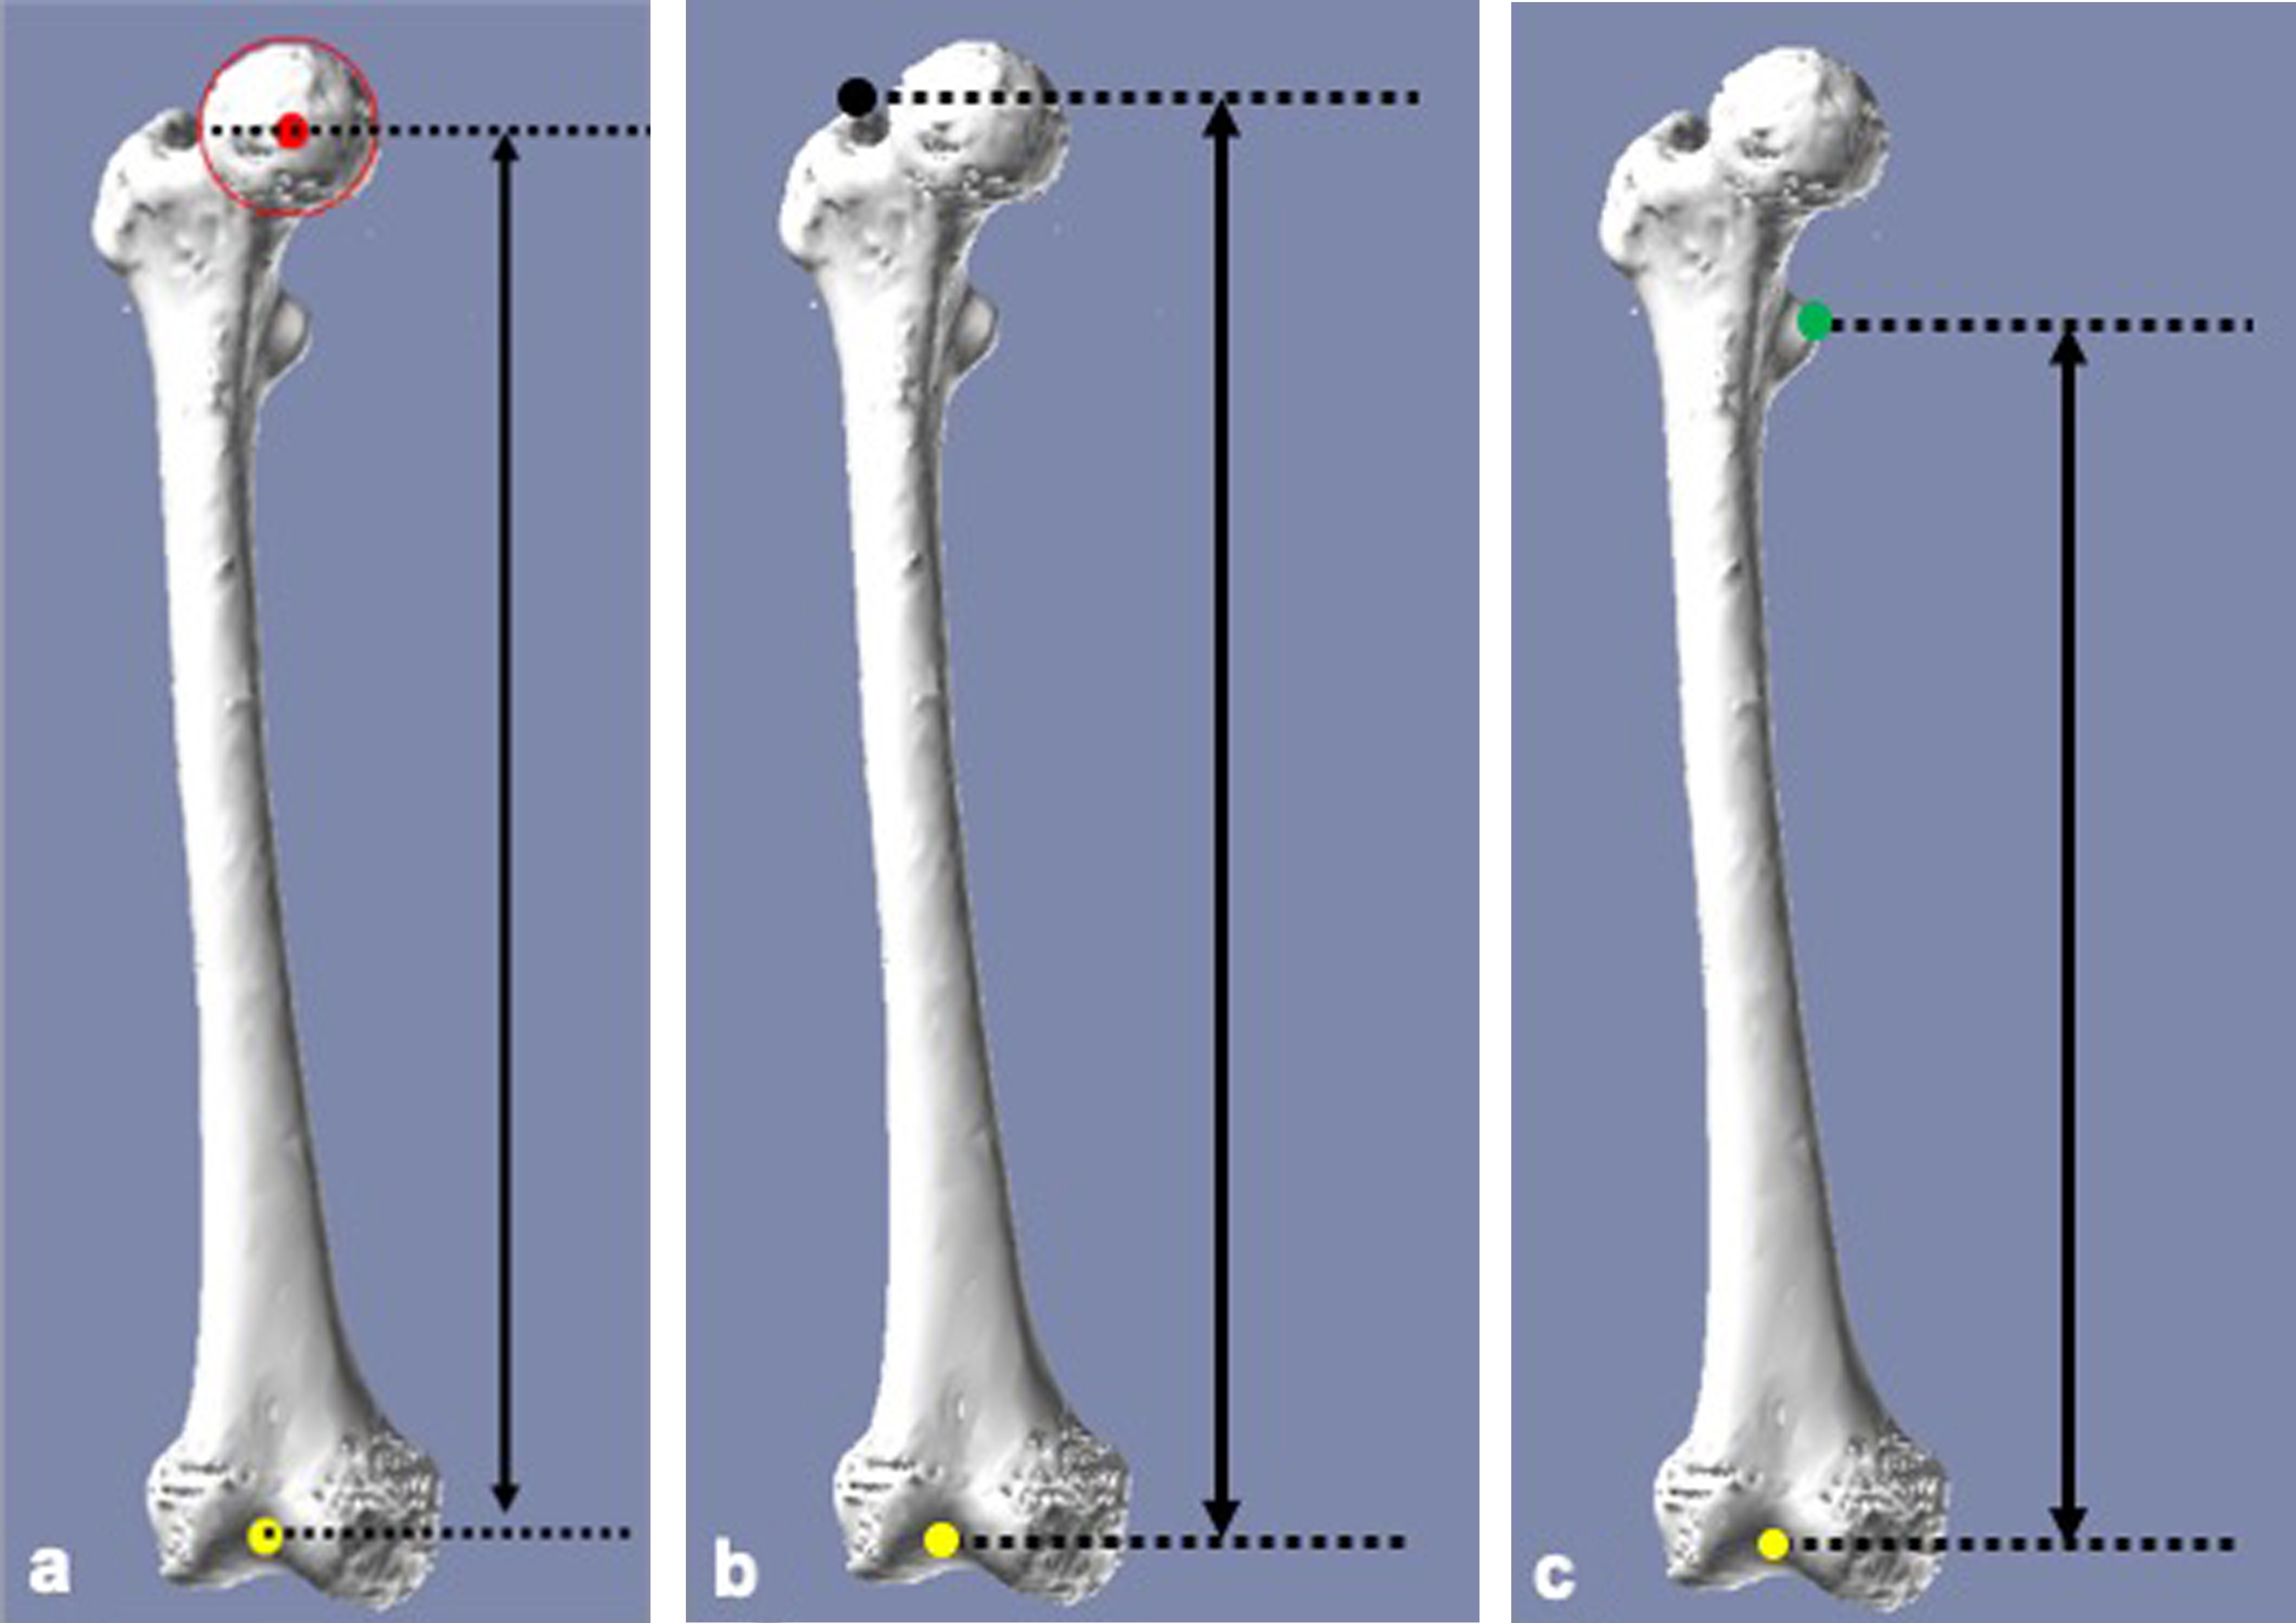 Fig. 4 
            a) Anatomical femoral length was defined as the distance between the centre of the femoral head (red point) and the knee centre of the femur (yellow point). b) Femoral length greater trochanter (GT) was defined as the vertical distance from the top of the GT (black point) to the most distal end of the intercondylar notch (yellow point). c) Femoral length lesser trochanter was defined as the vertical distance from the most medial prominence of the lesser trochanter (green point) to the most distal end of the intercondylar notch (yellow point).
          